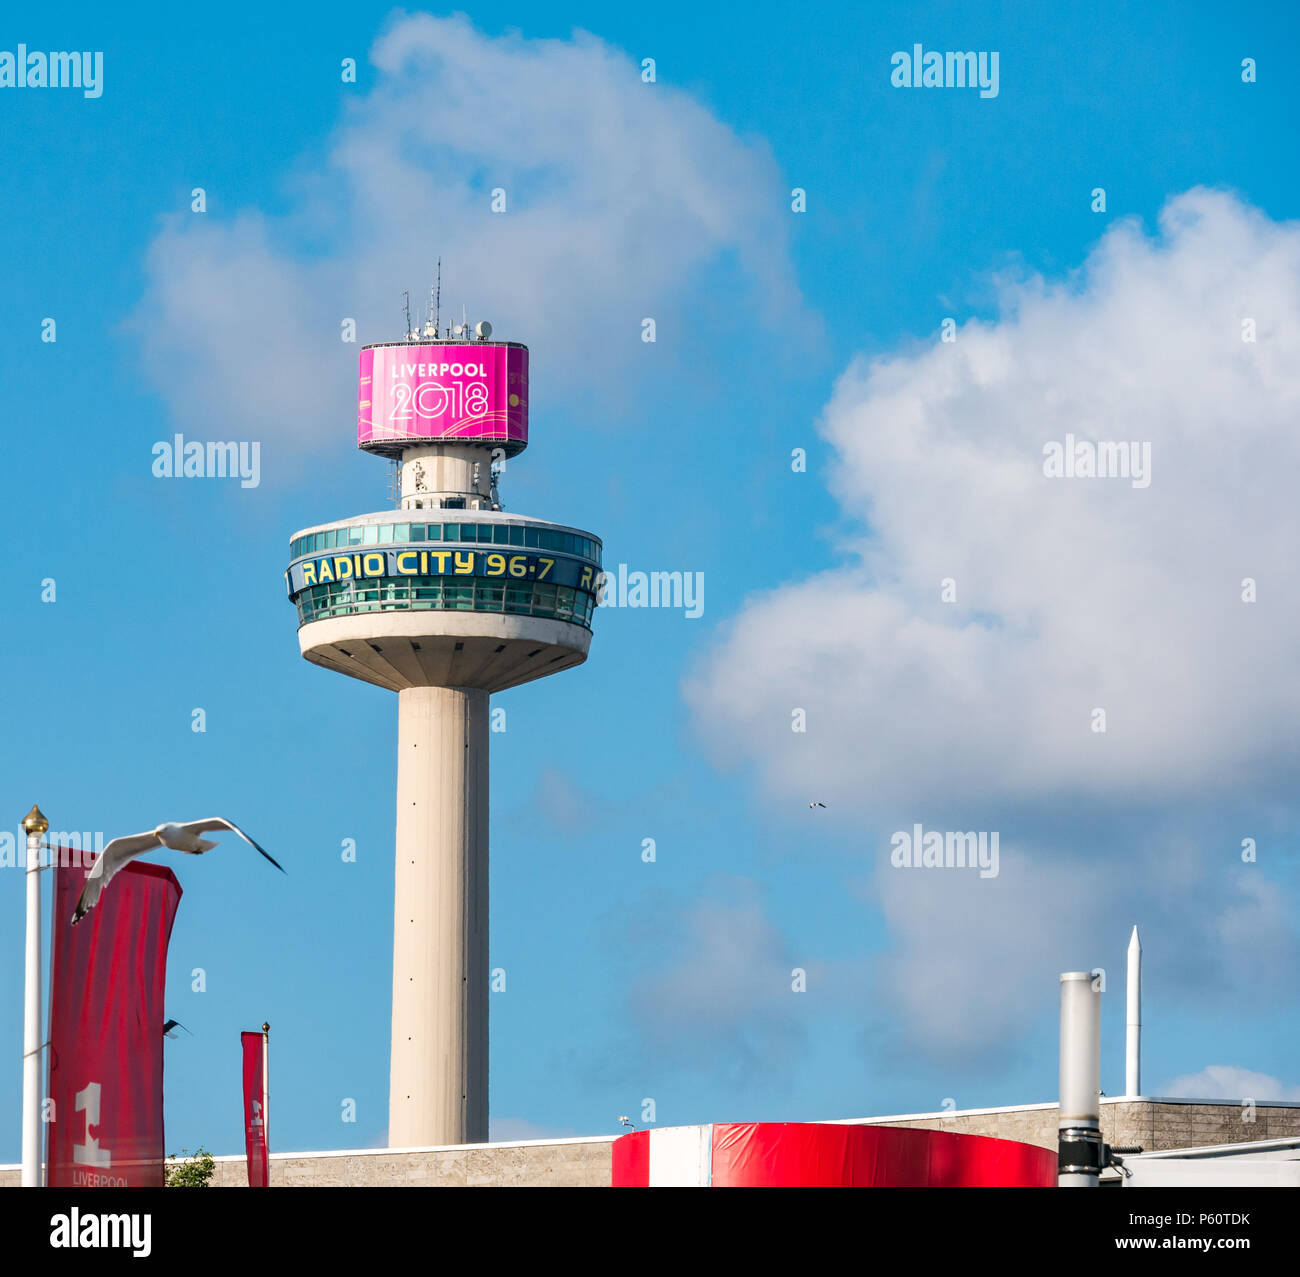 View of top of 1960s Radio City Tower or St Johns Beacon observation tower, Liverpool, England, UK, with blue sky Stock Photo